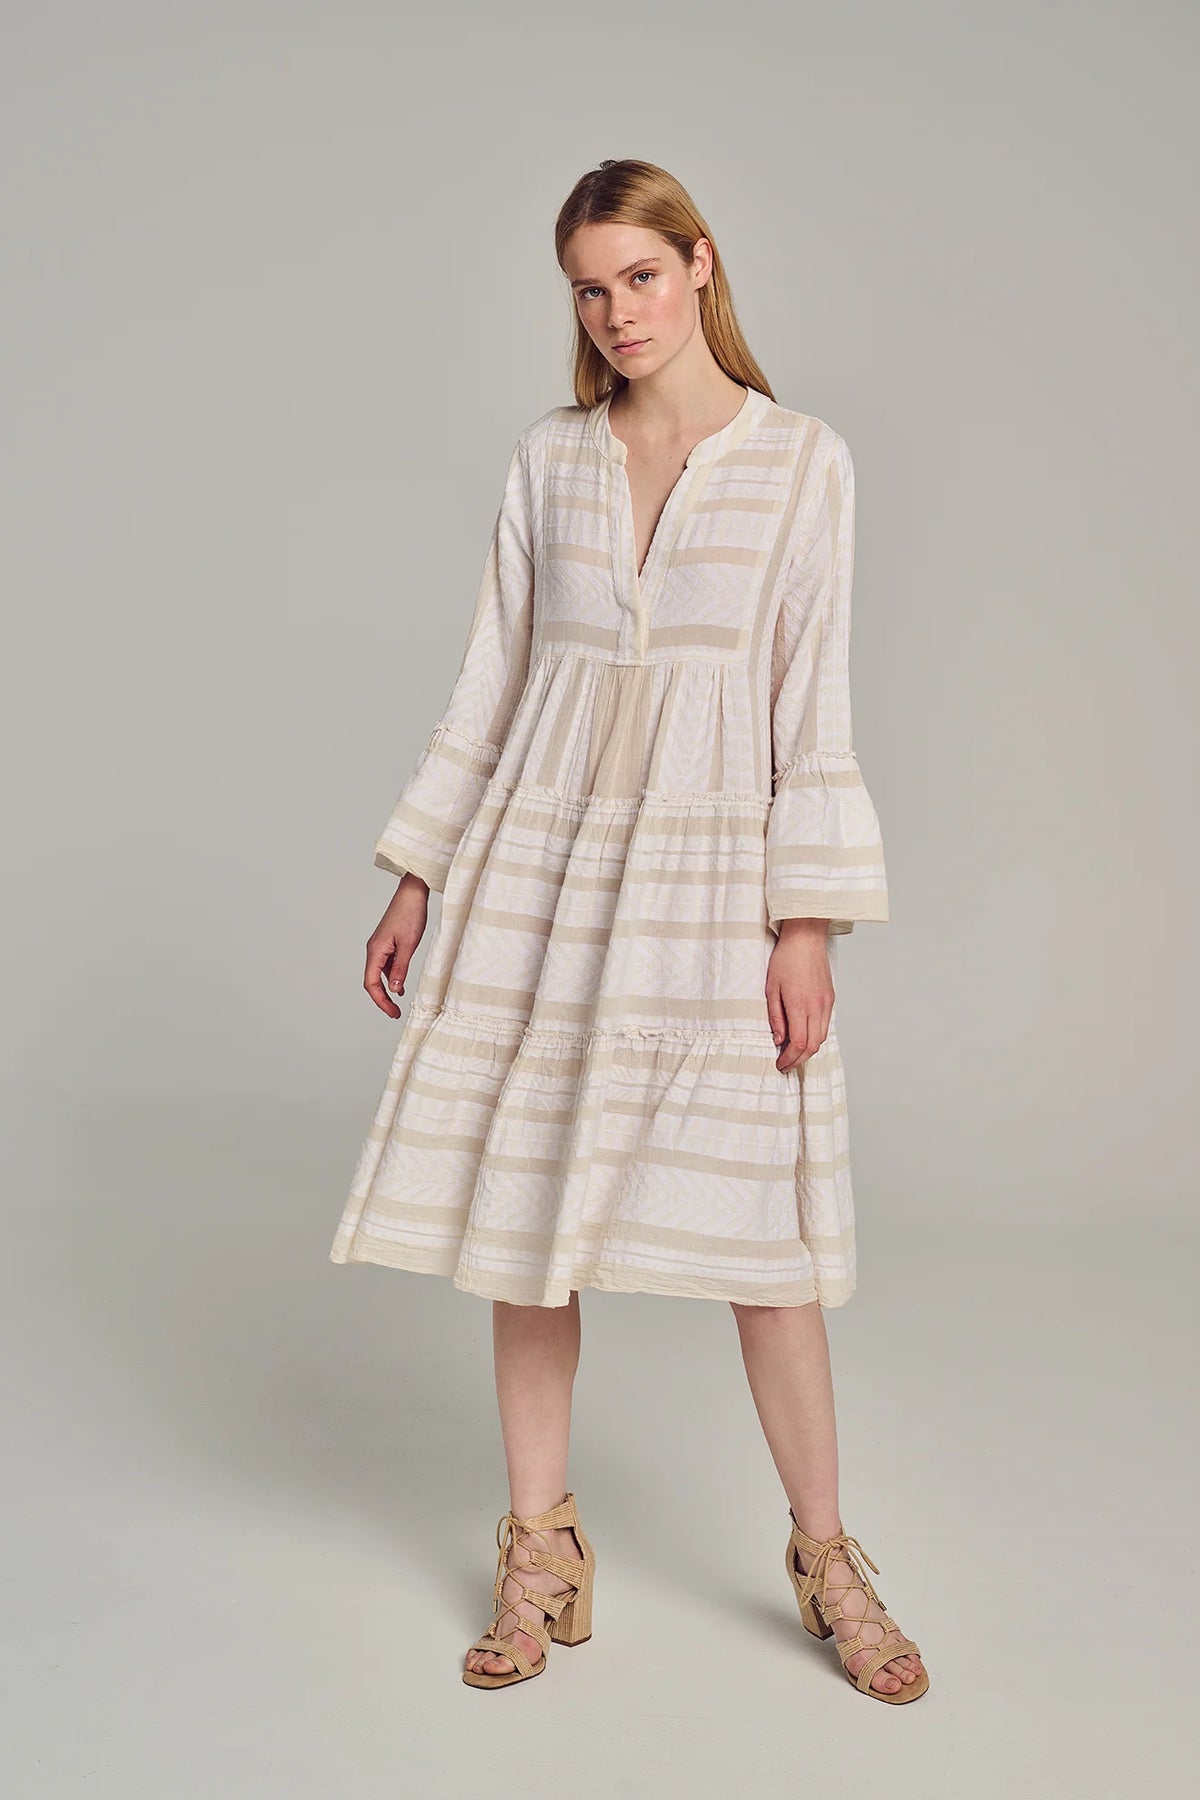 Ecru notch neck midi dress with long fluted sleeves and tripe tiered A line skirt with off-white embroidery throughout